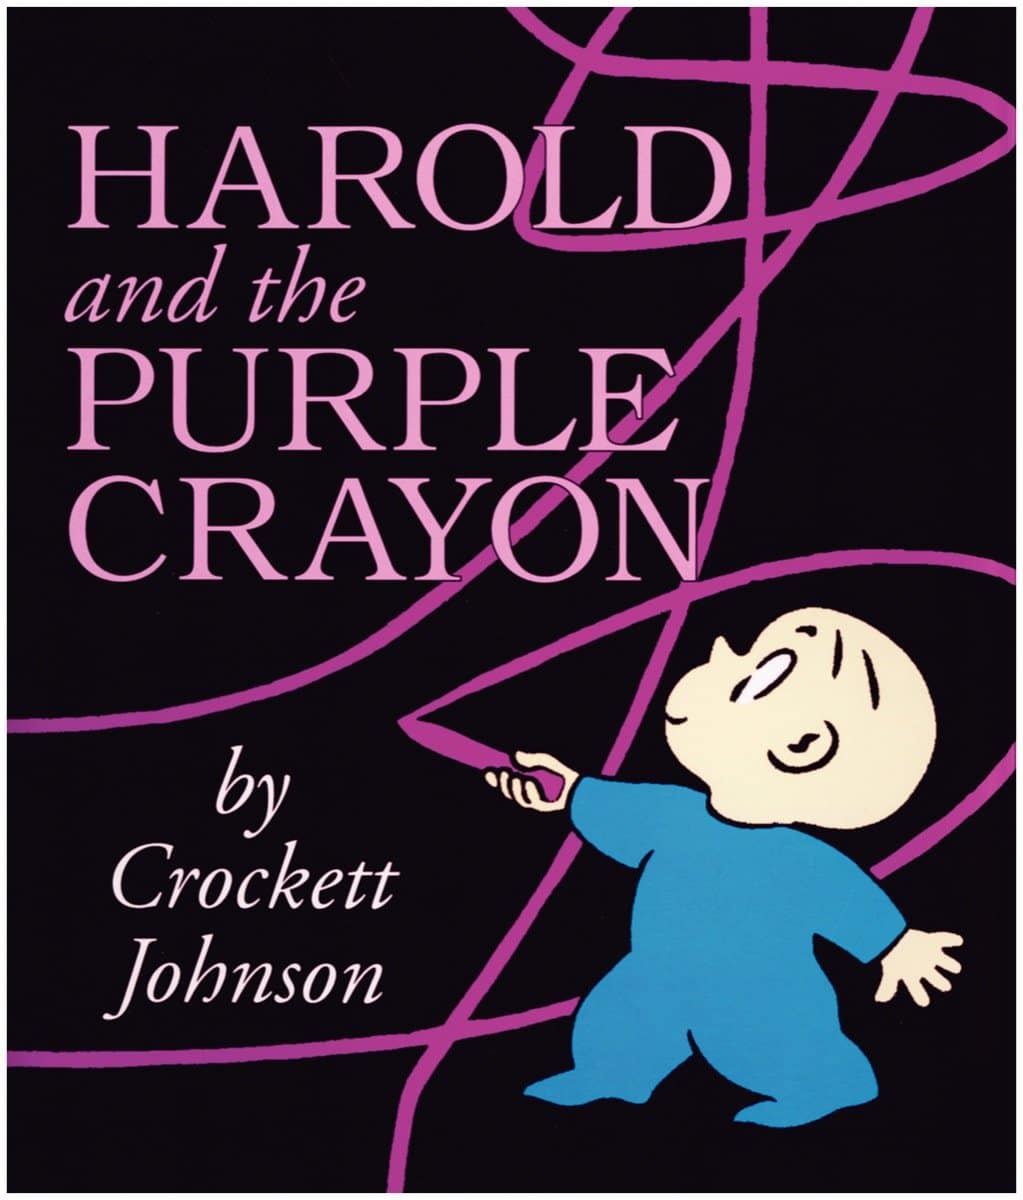 The cover for the book Harold and the Purple Crayon